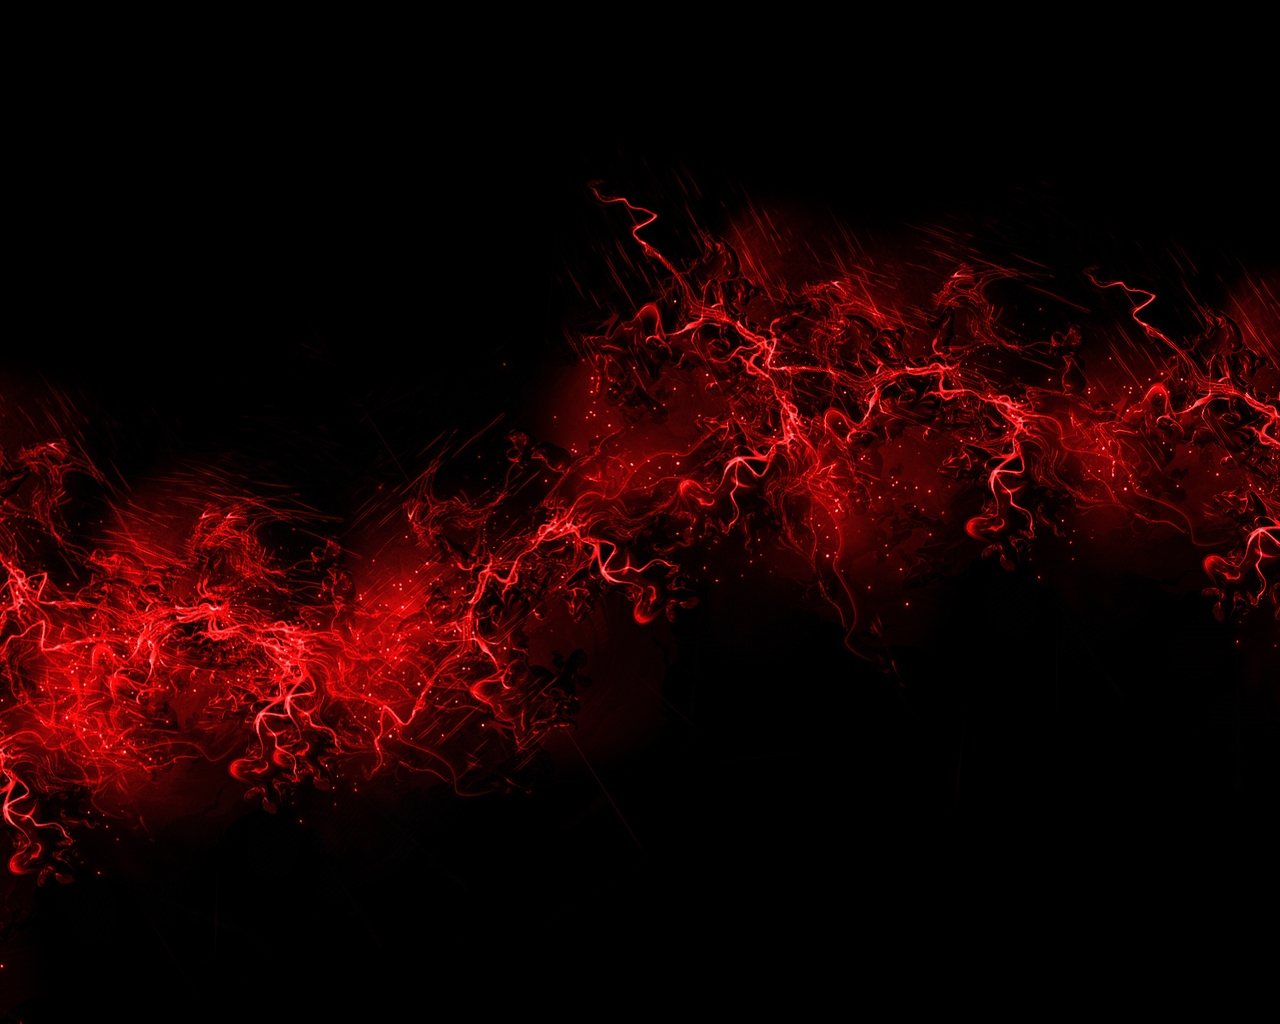 red-and-black-1280x1024-wallpaper-7284